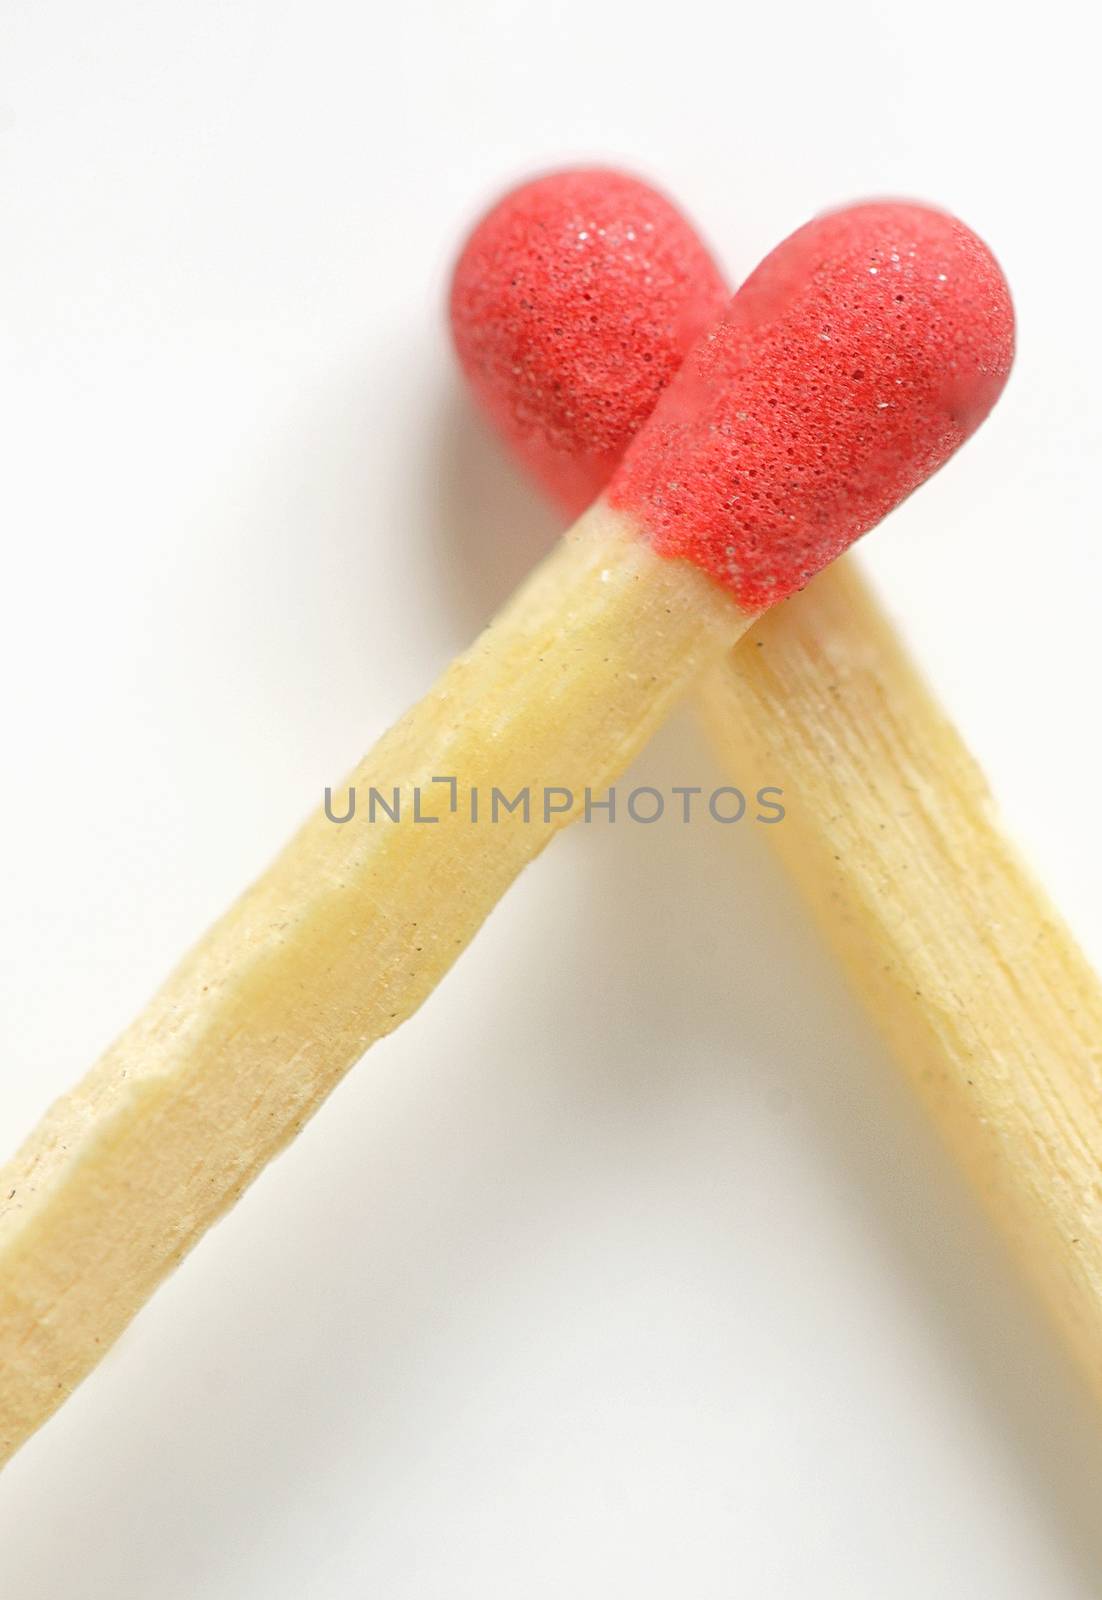 Conceptual Love from matches on white background